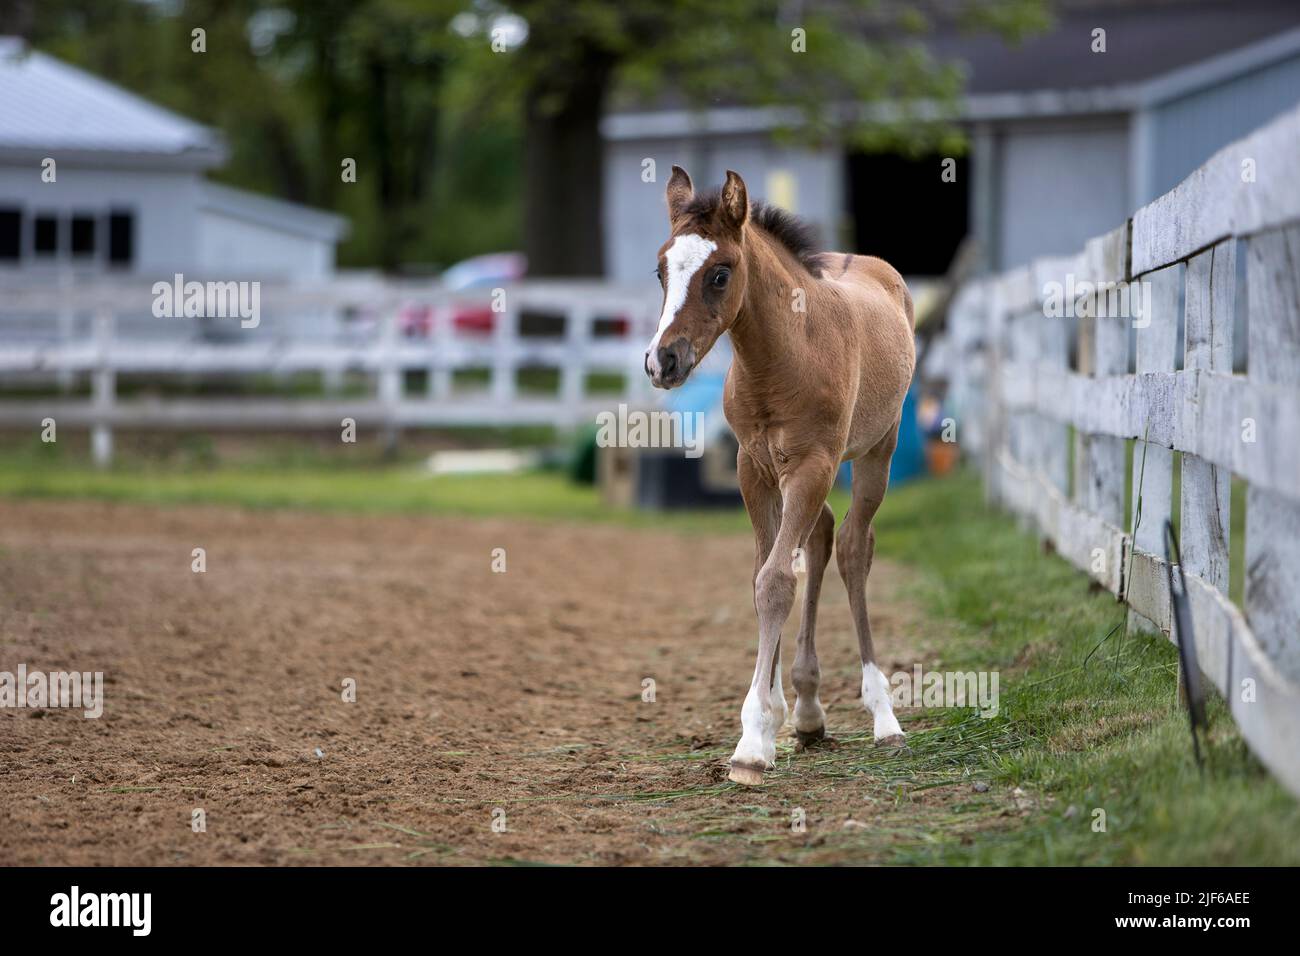 A foal walking alone next to a fence at a horse farm. Stock Photo